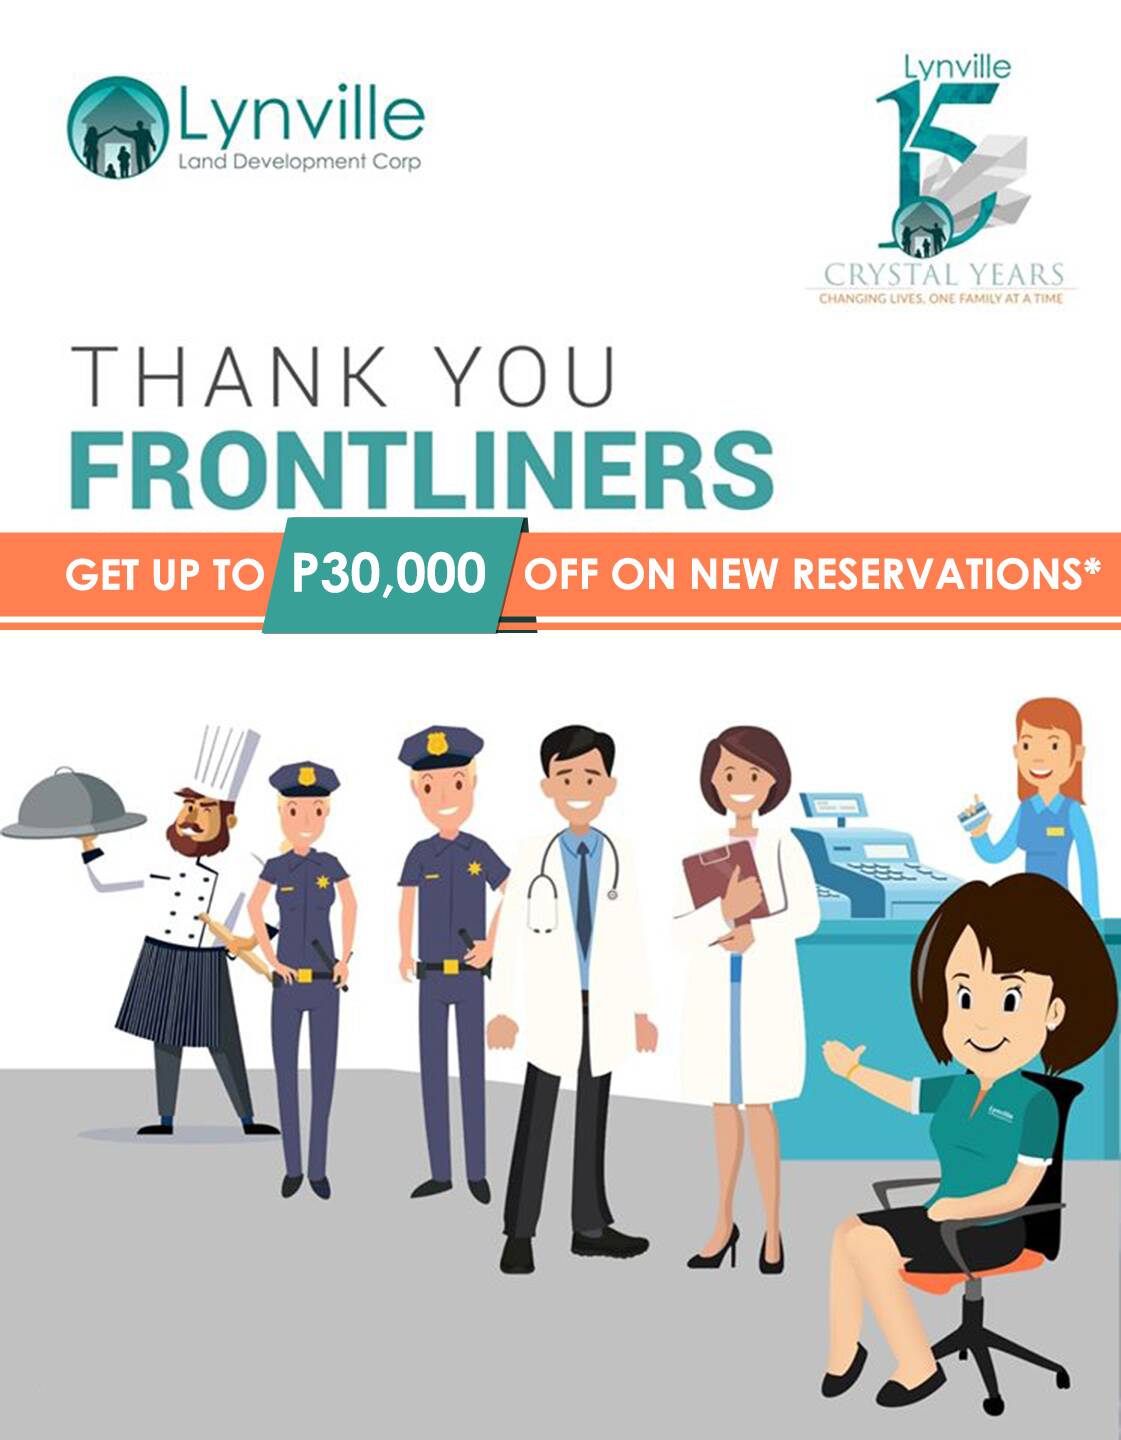 FRONTLINERS GET UP TO P 30,000 OFF ON NEW RESERVATIONS